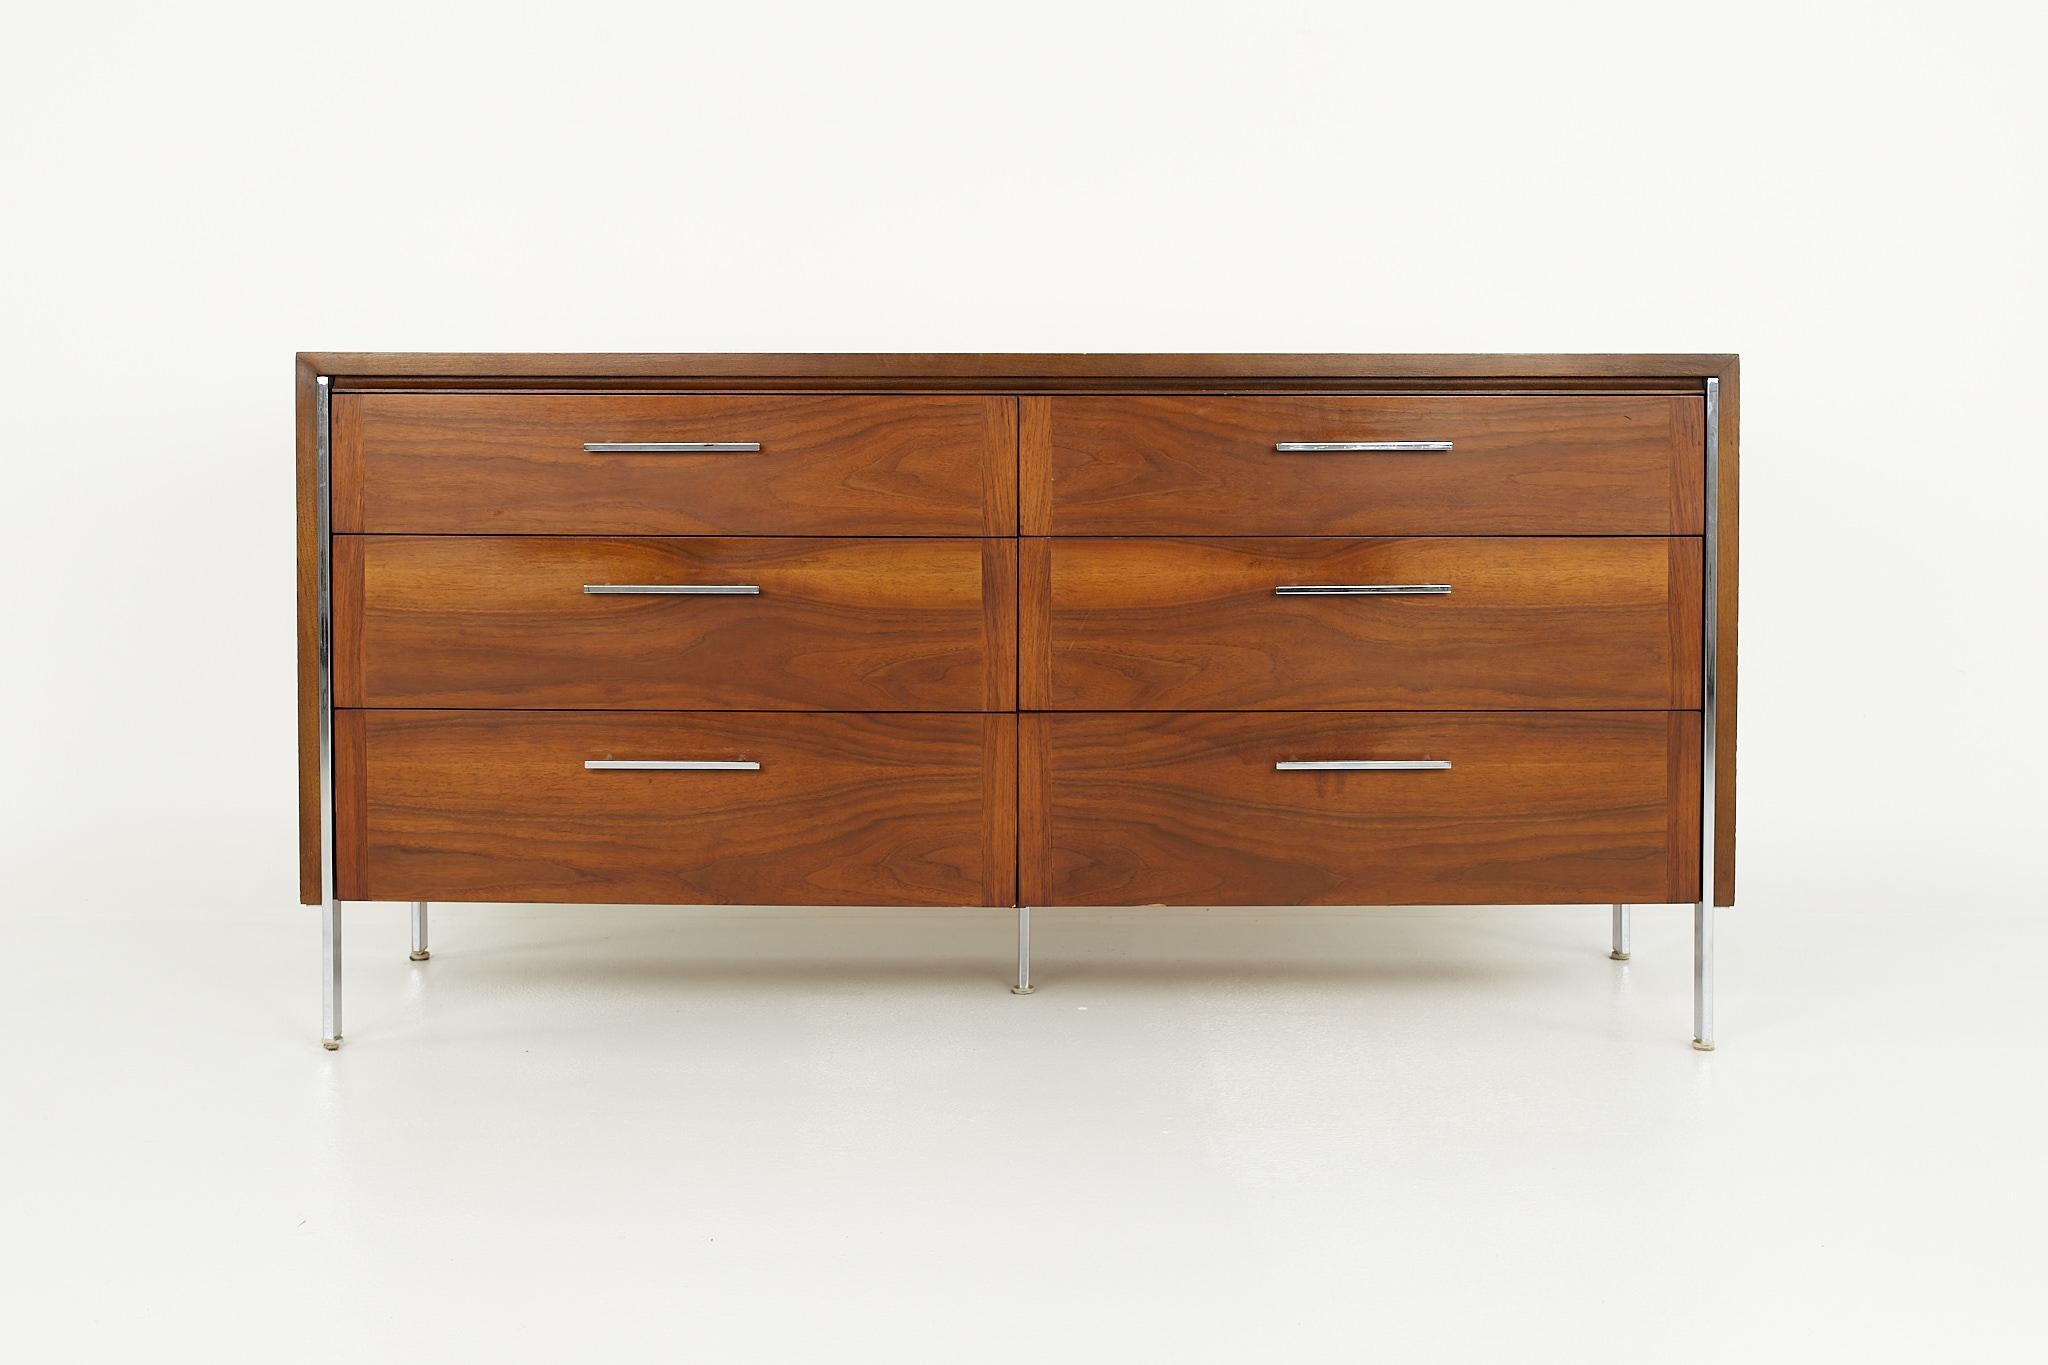 Paul McCobb style lane mid century 6-drawer walnut and chrome lowboy dresser

This dresser measures: 62 wide x 18 deep x 30 inches high

?All pieces of furniture can be had in what we call restored vintage condition. That means the piece is